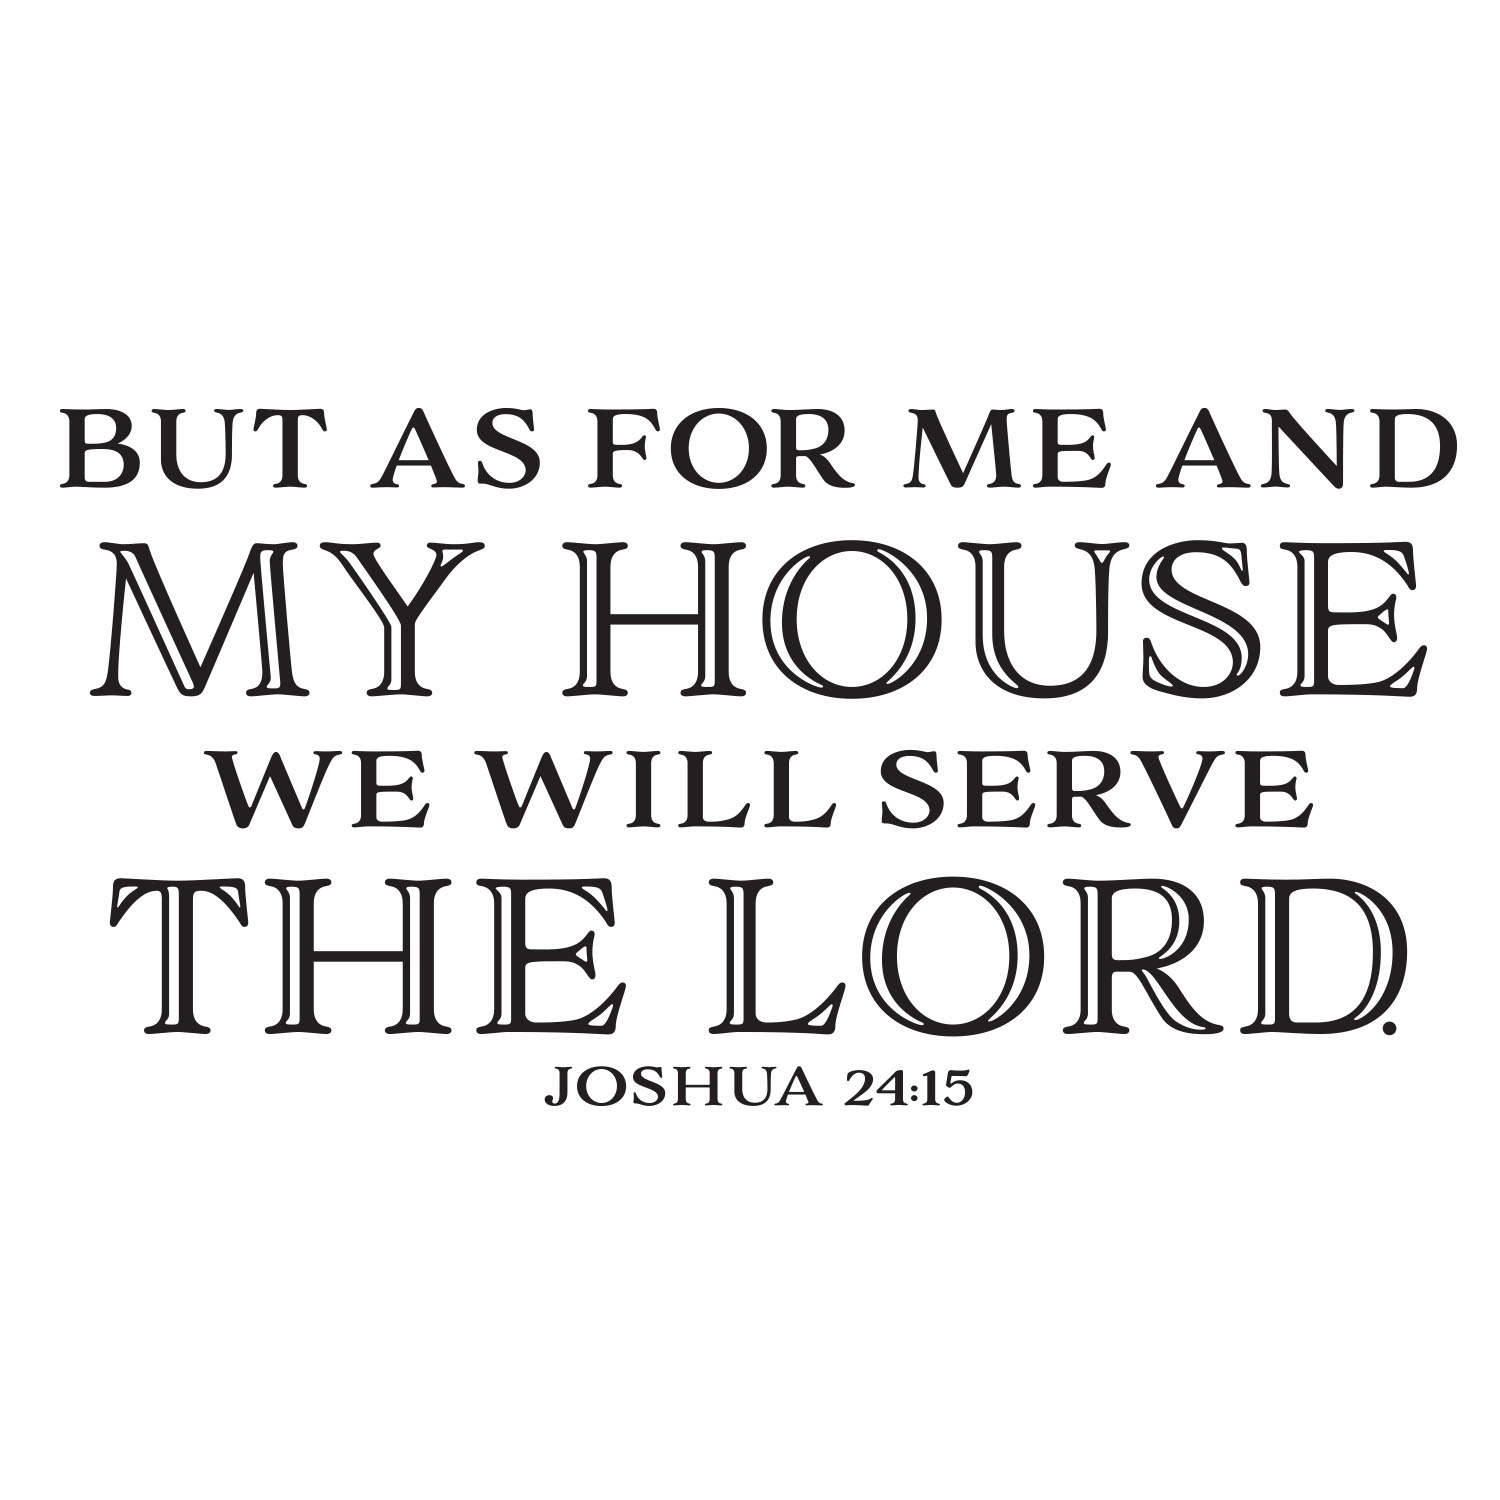 joshua-24v15-vinyl-wall-decal-15-as-for-me-and-my-house-we-will-serve